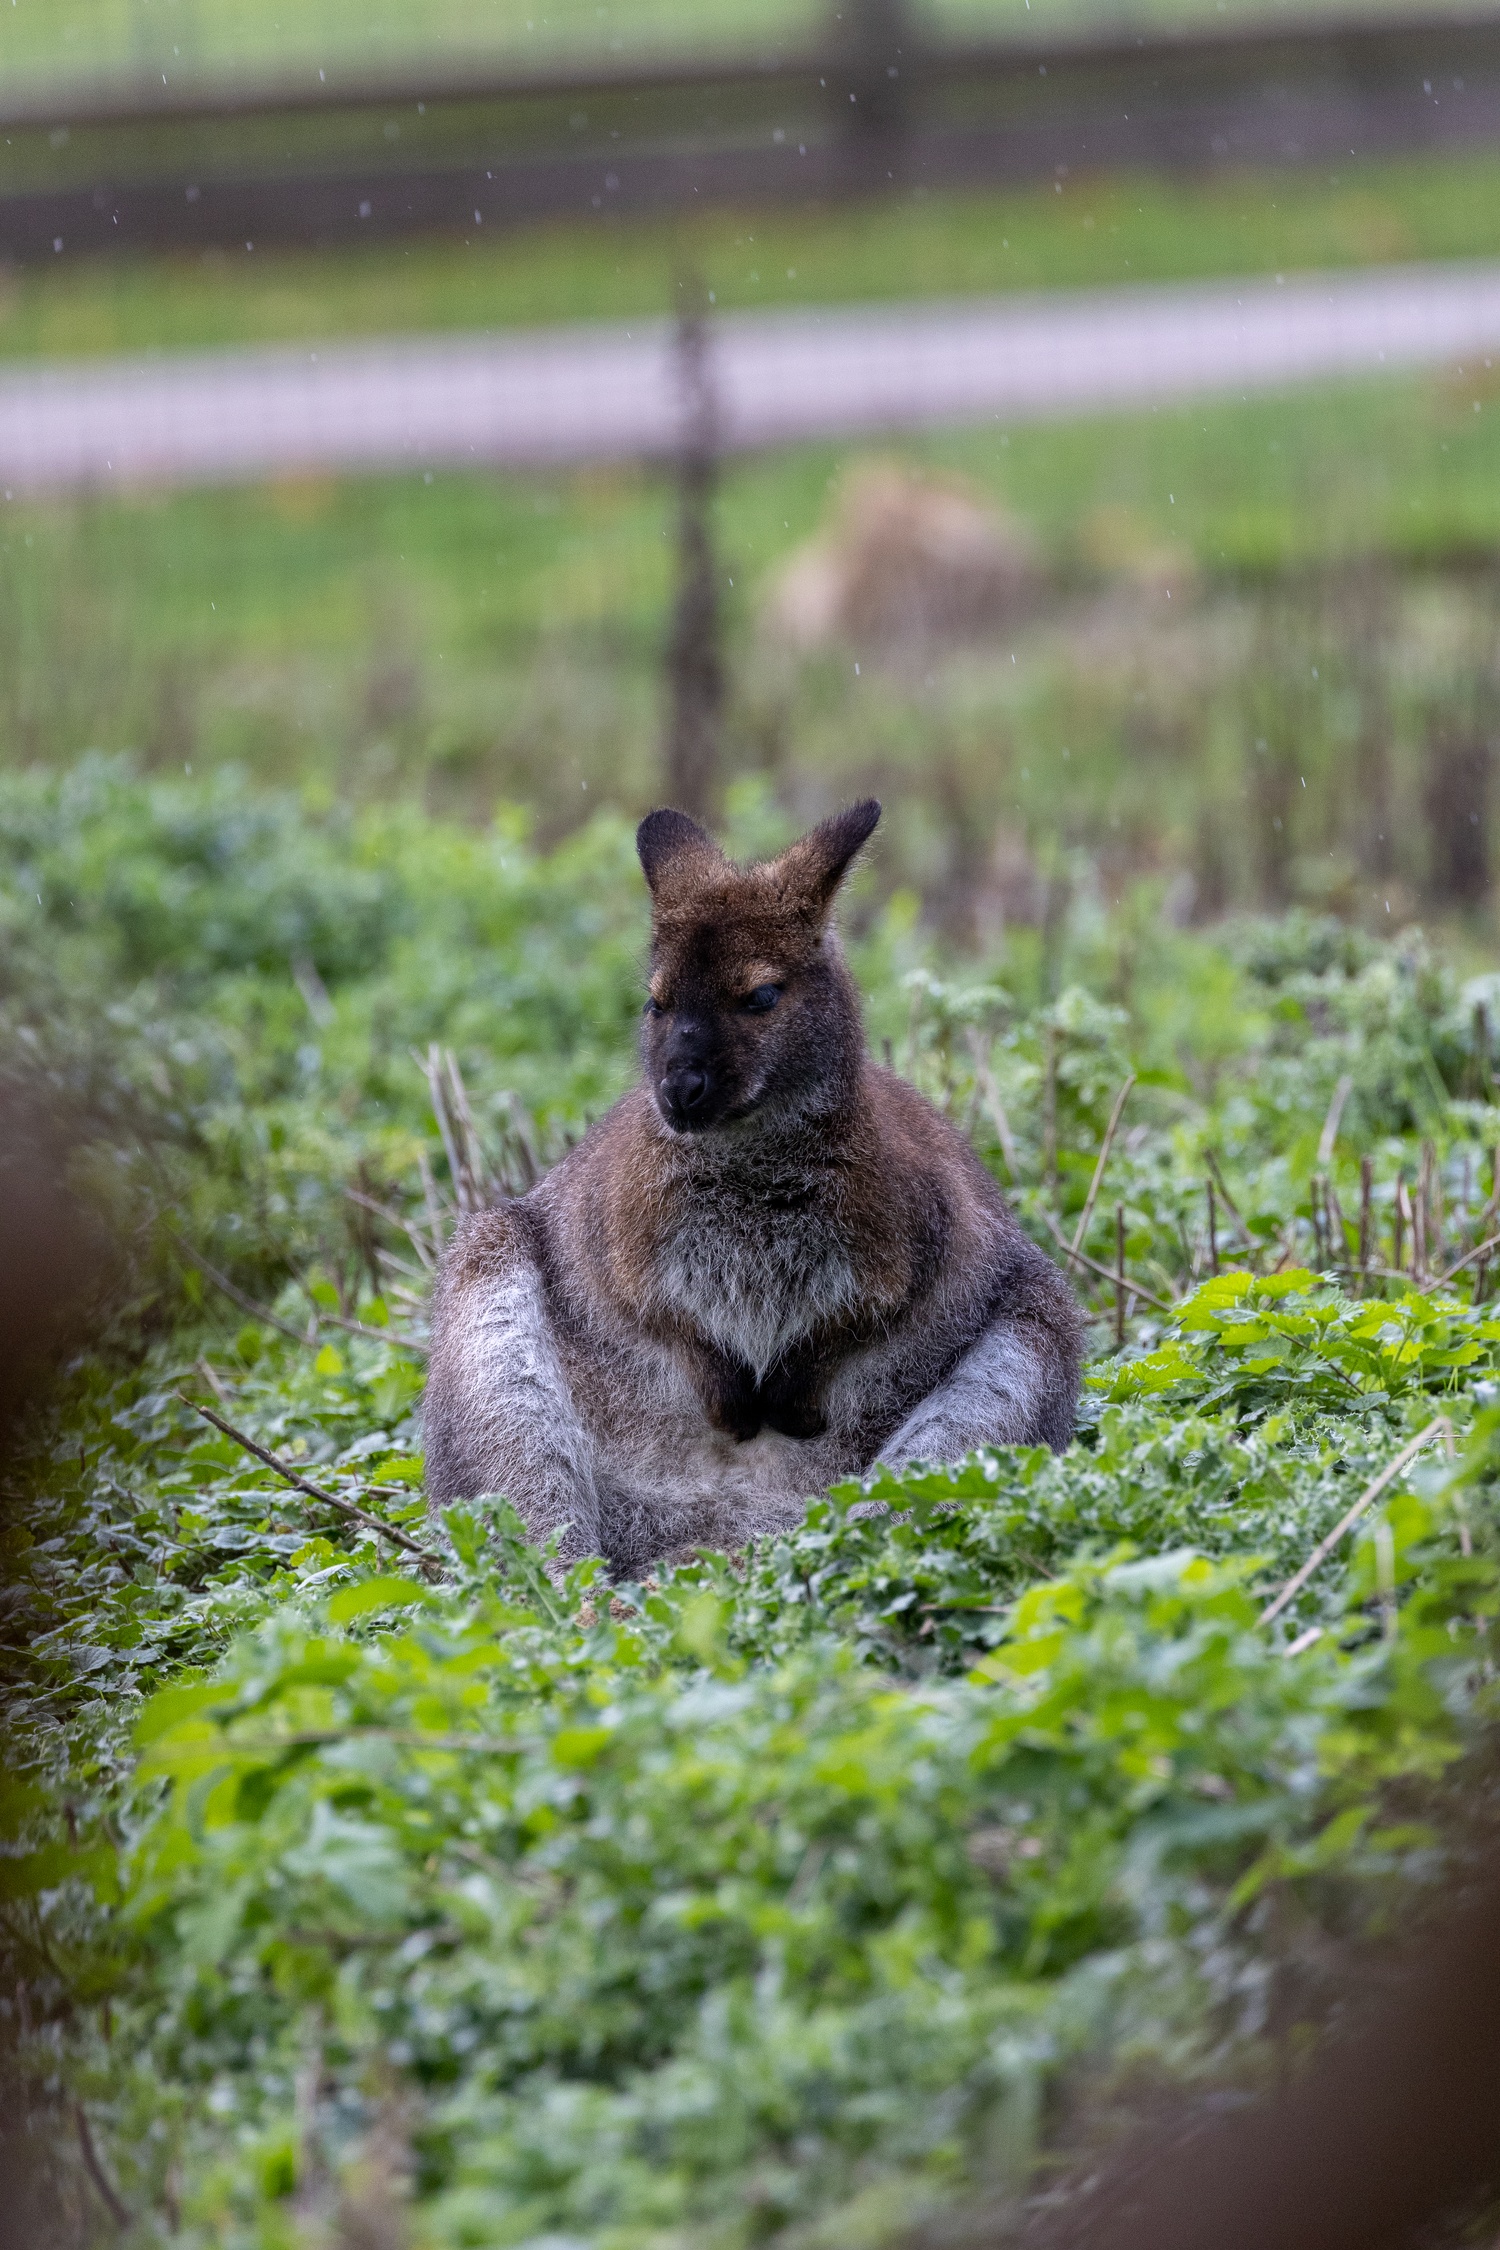 Wallaby sat on grass as it rains